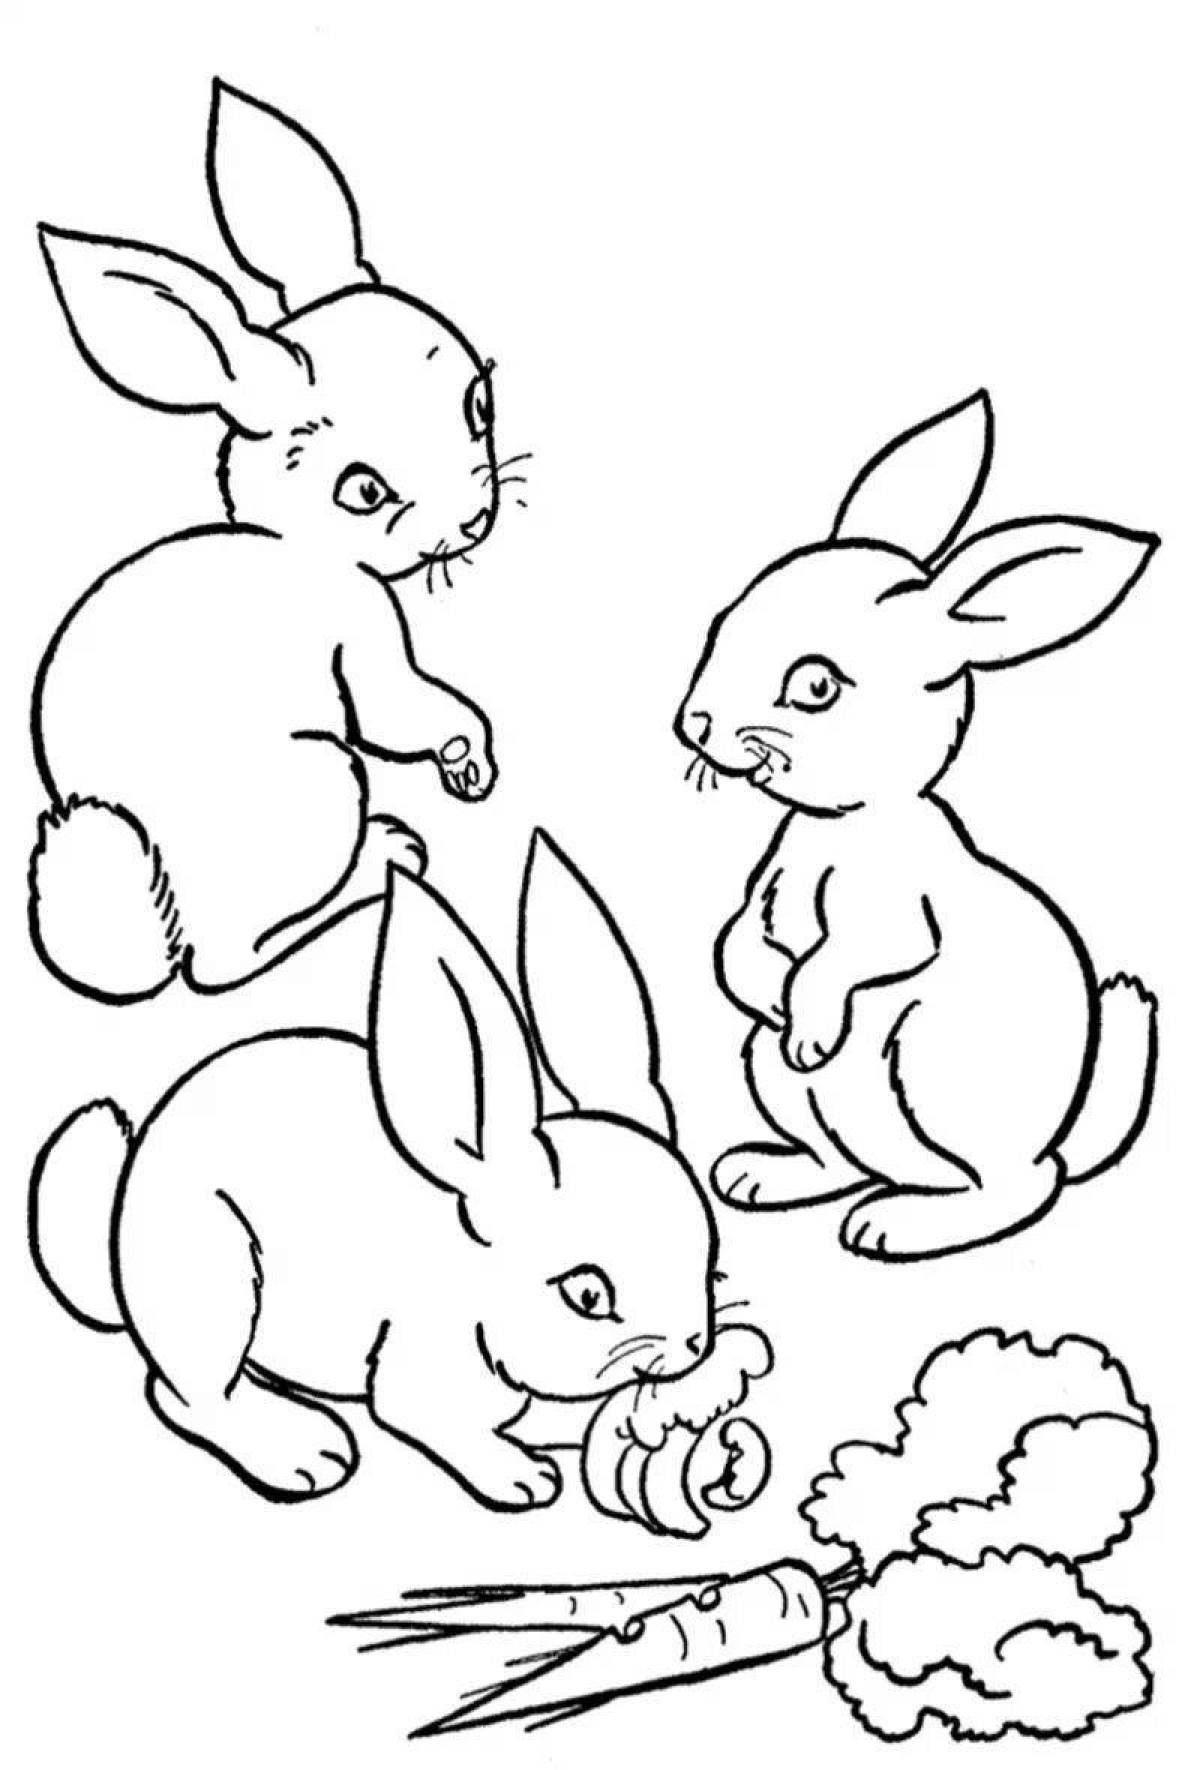 Hare with bunnies #12